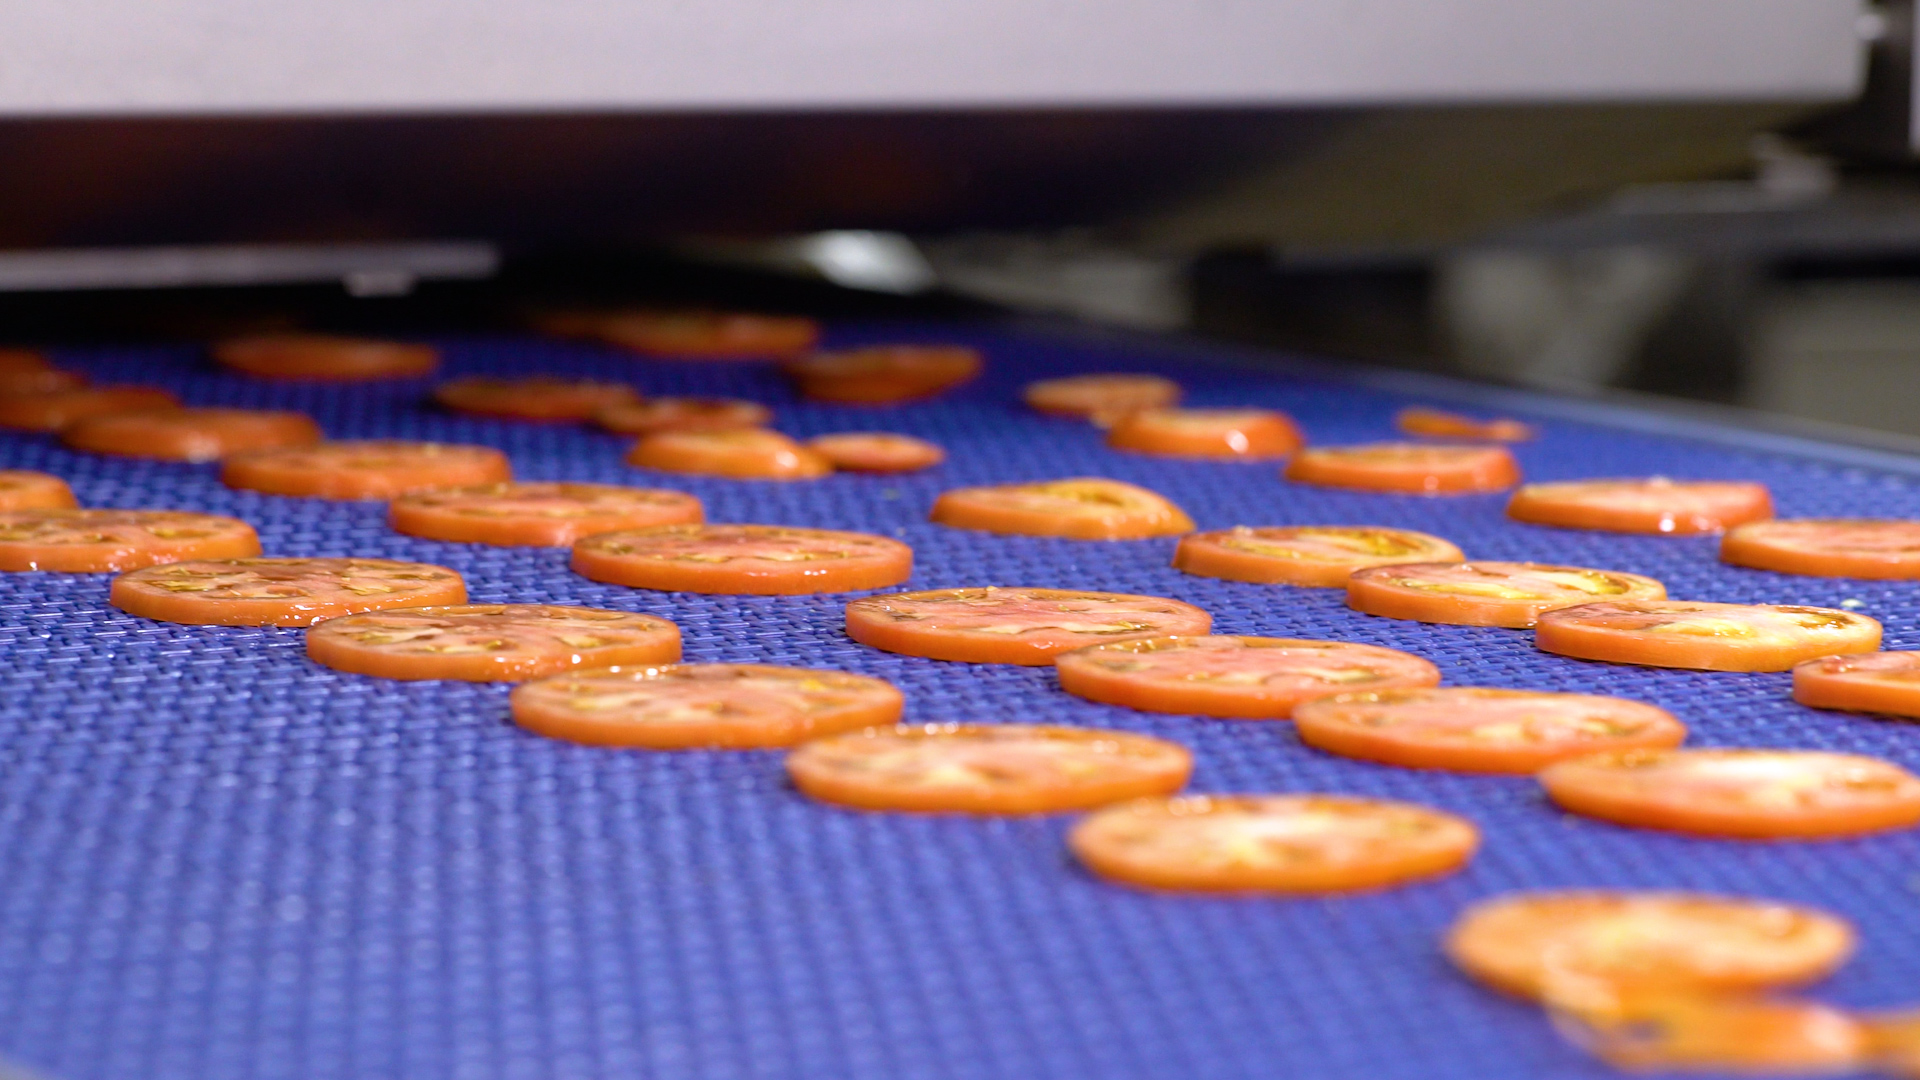 Tomato slices cut by our Fresh Tomato Slicers.